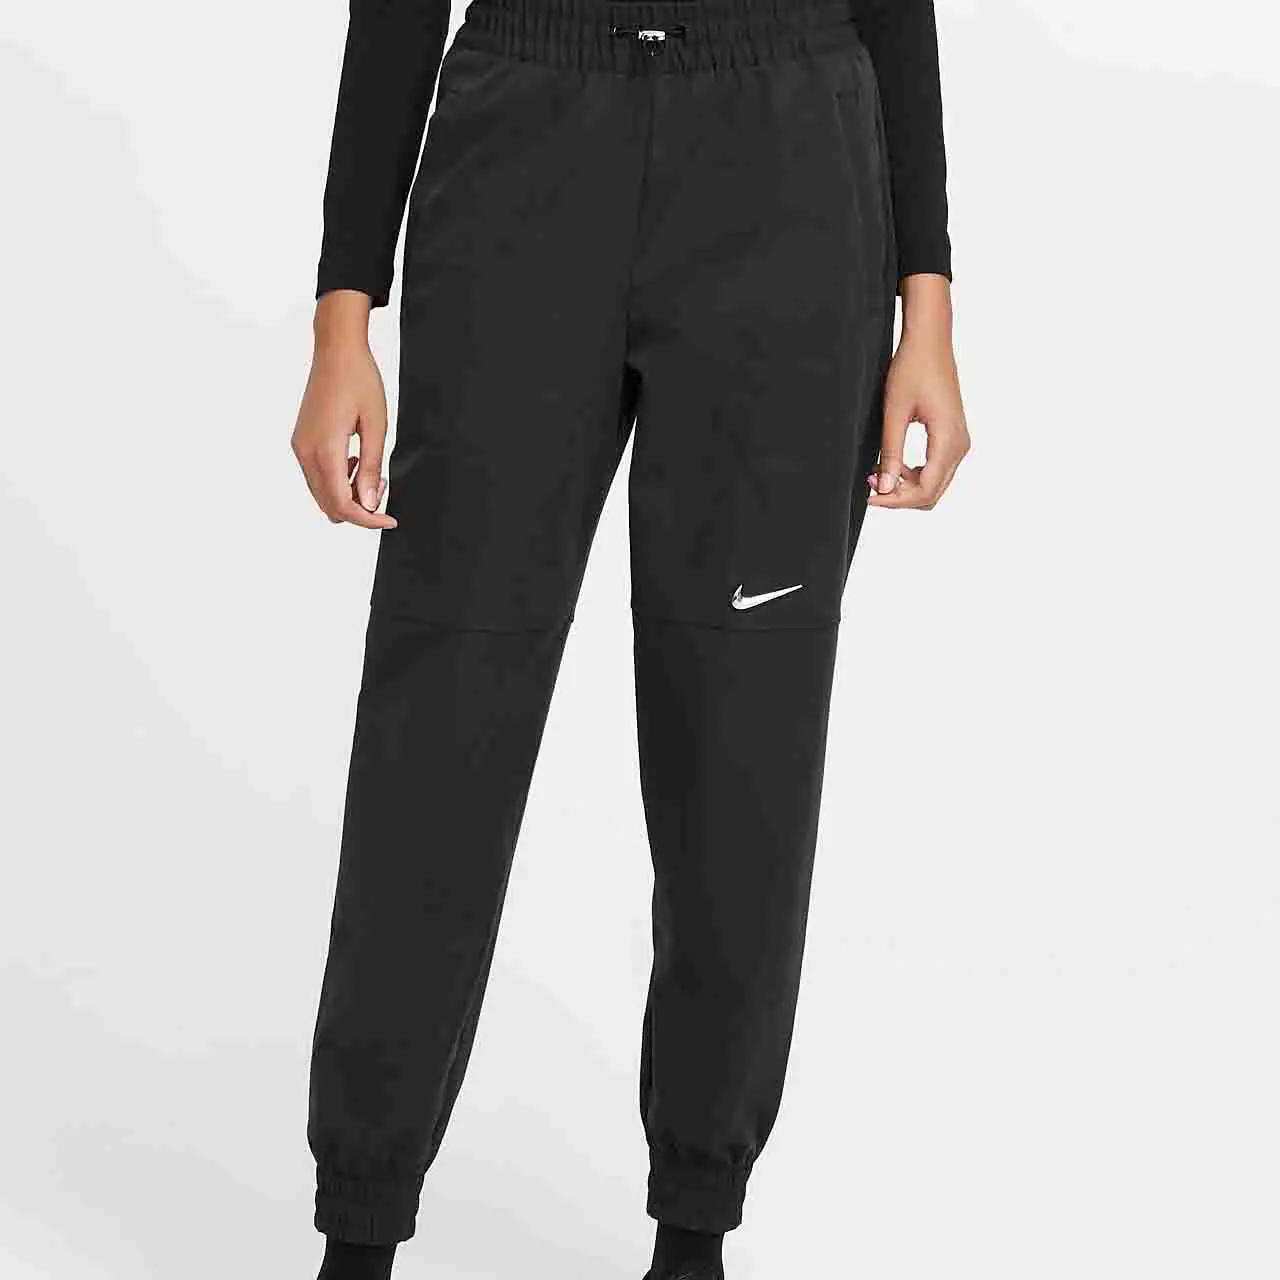 Nike's New Utility Sets Are This Season's Wardrobe Essentials | The ...